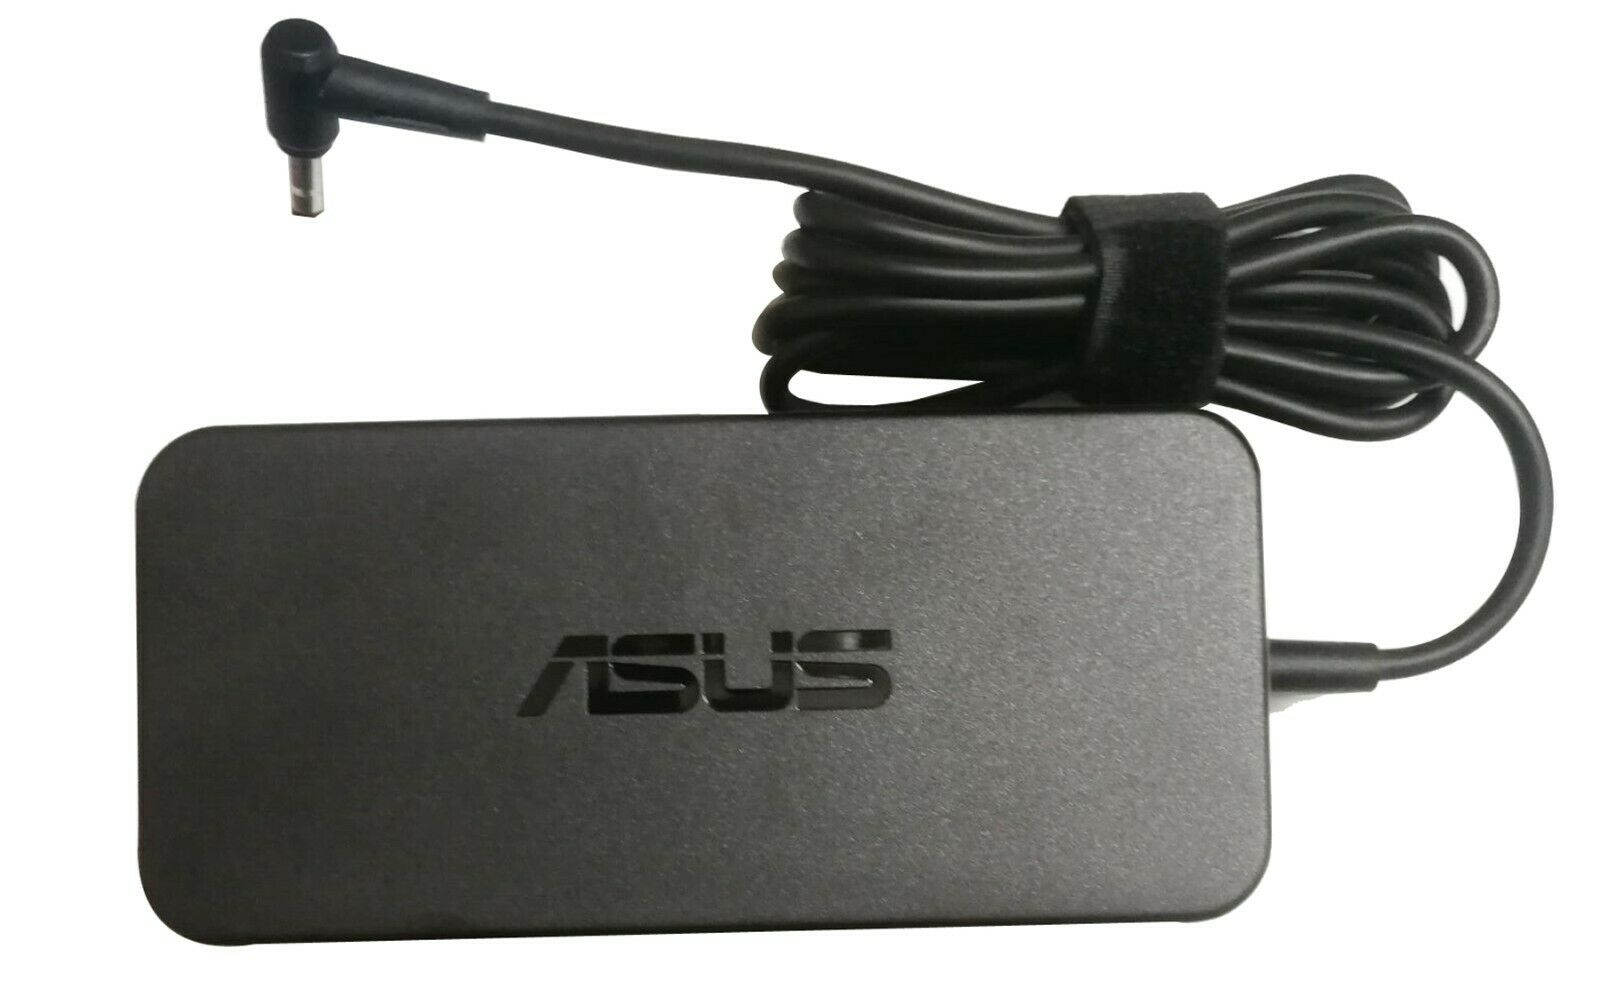 NEW Original 180W AC Adapter Charger ASUS ROG GL502VM-DS74-HID11, GL502VM-DS74-HID5 Charger